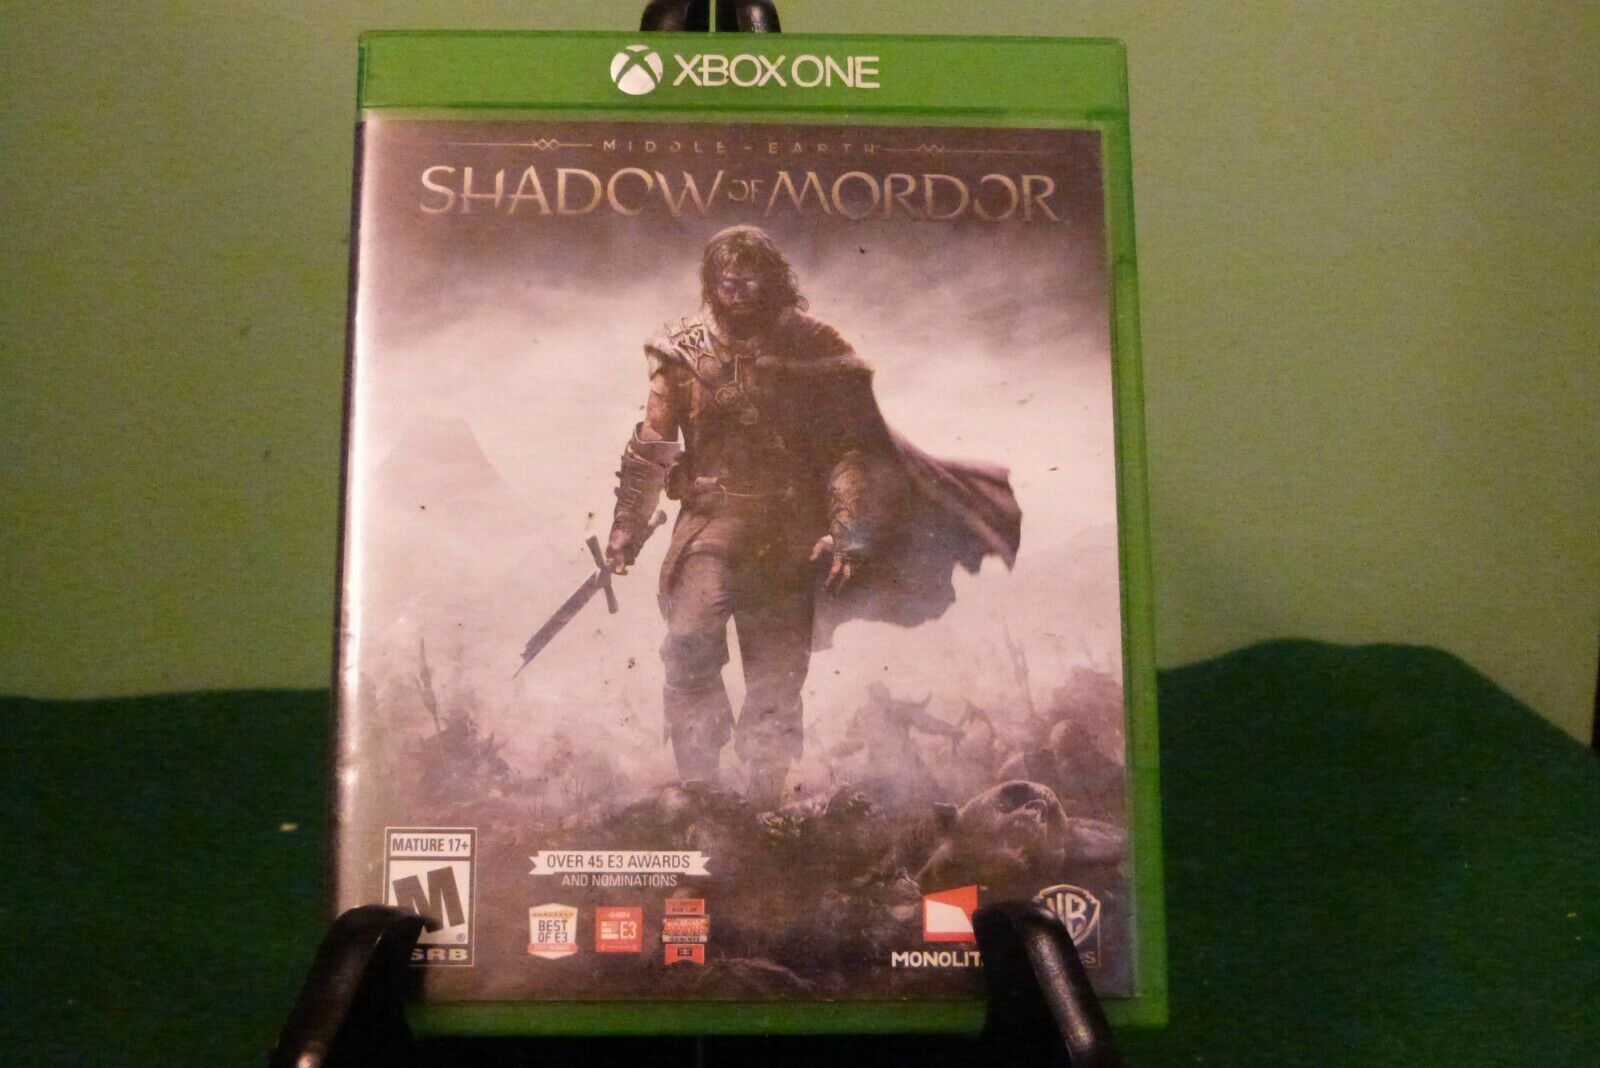 Primary image for Middle-earth: Shadow of Mordor (Microsoft Xbox One, 2014) w/ Manual - VG+ - 1x